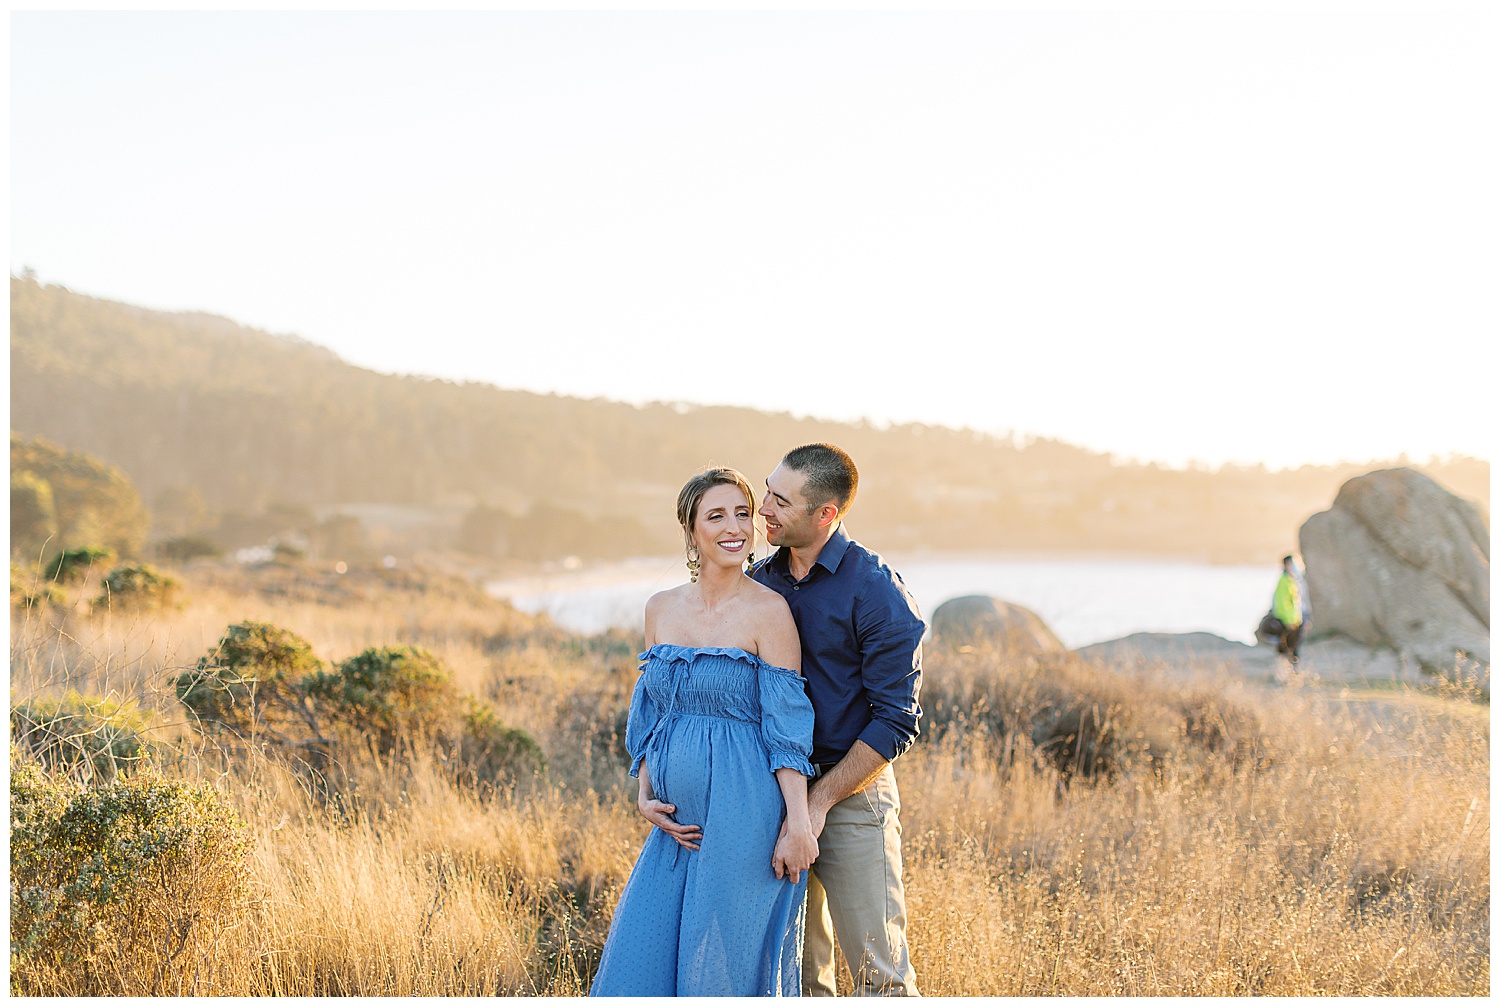 landscape portrait of new soon to be parents dressed in blue standing in a golden field by film photographer AGS Photo Art